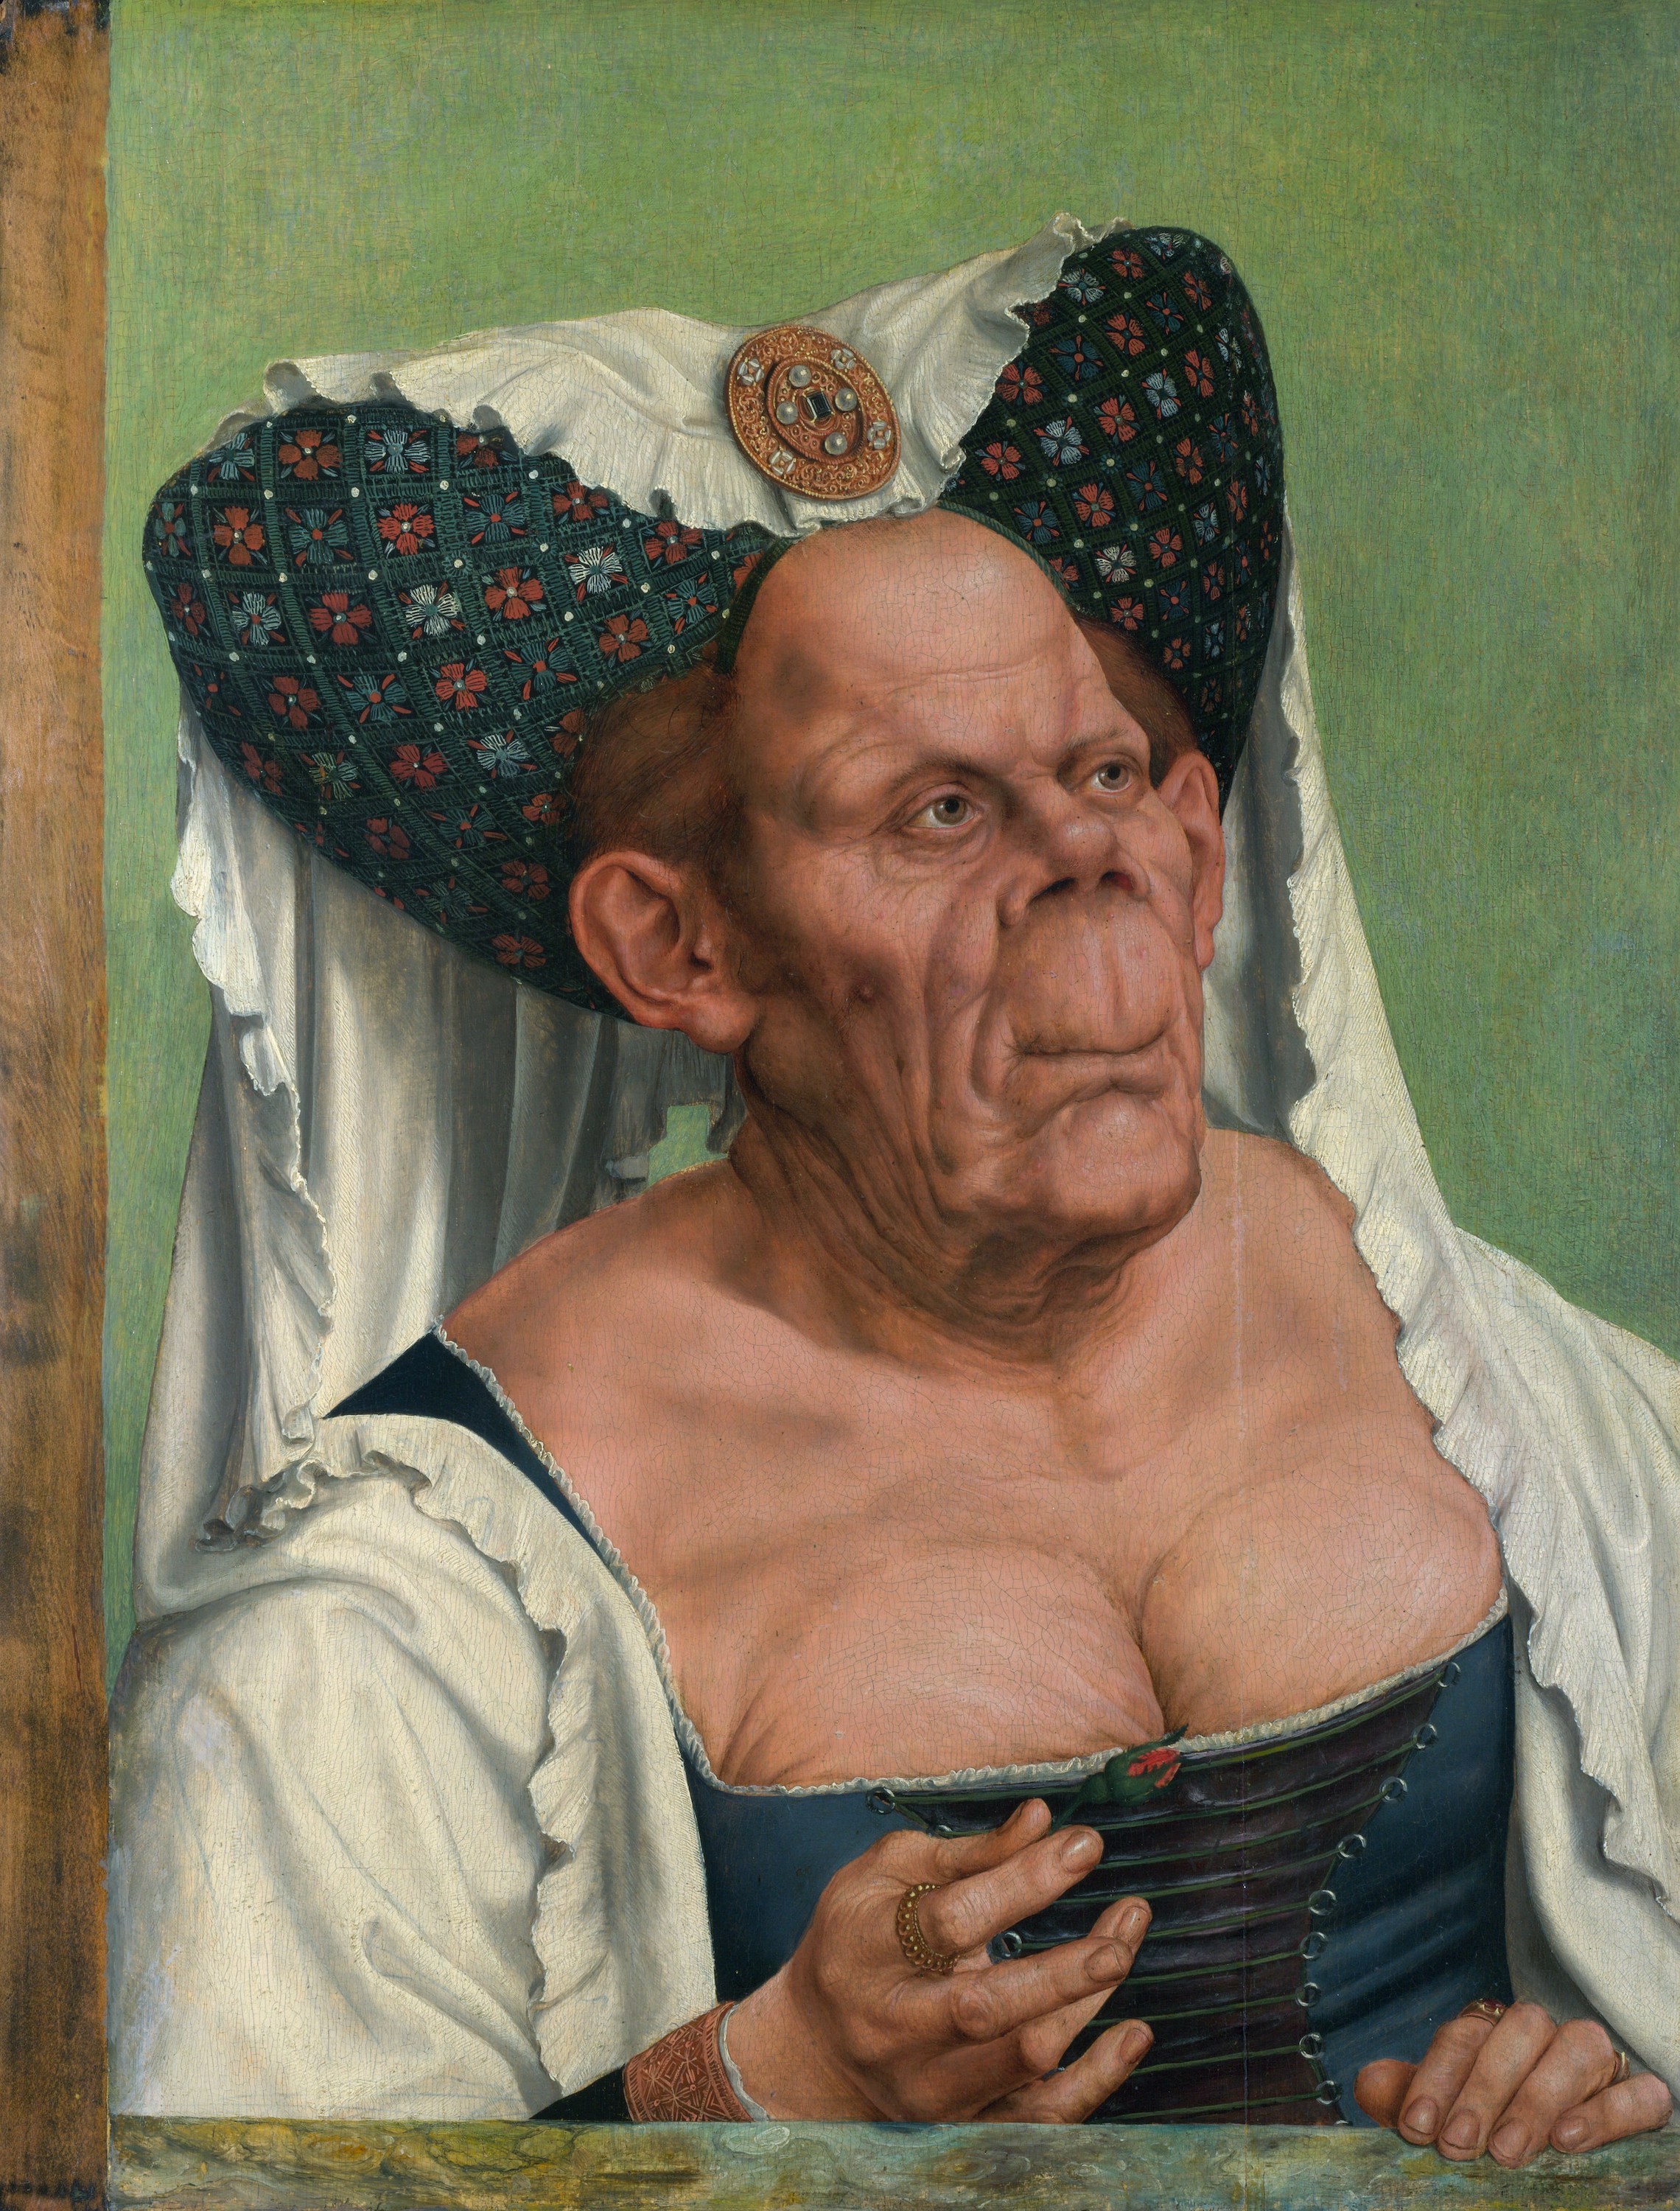 The Ugly Duchess by Quentin Metsys - circa 1513 - 64.2 × 45.4 cm National Gallery